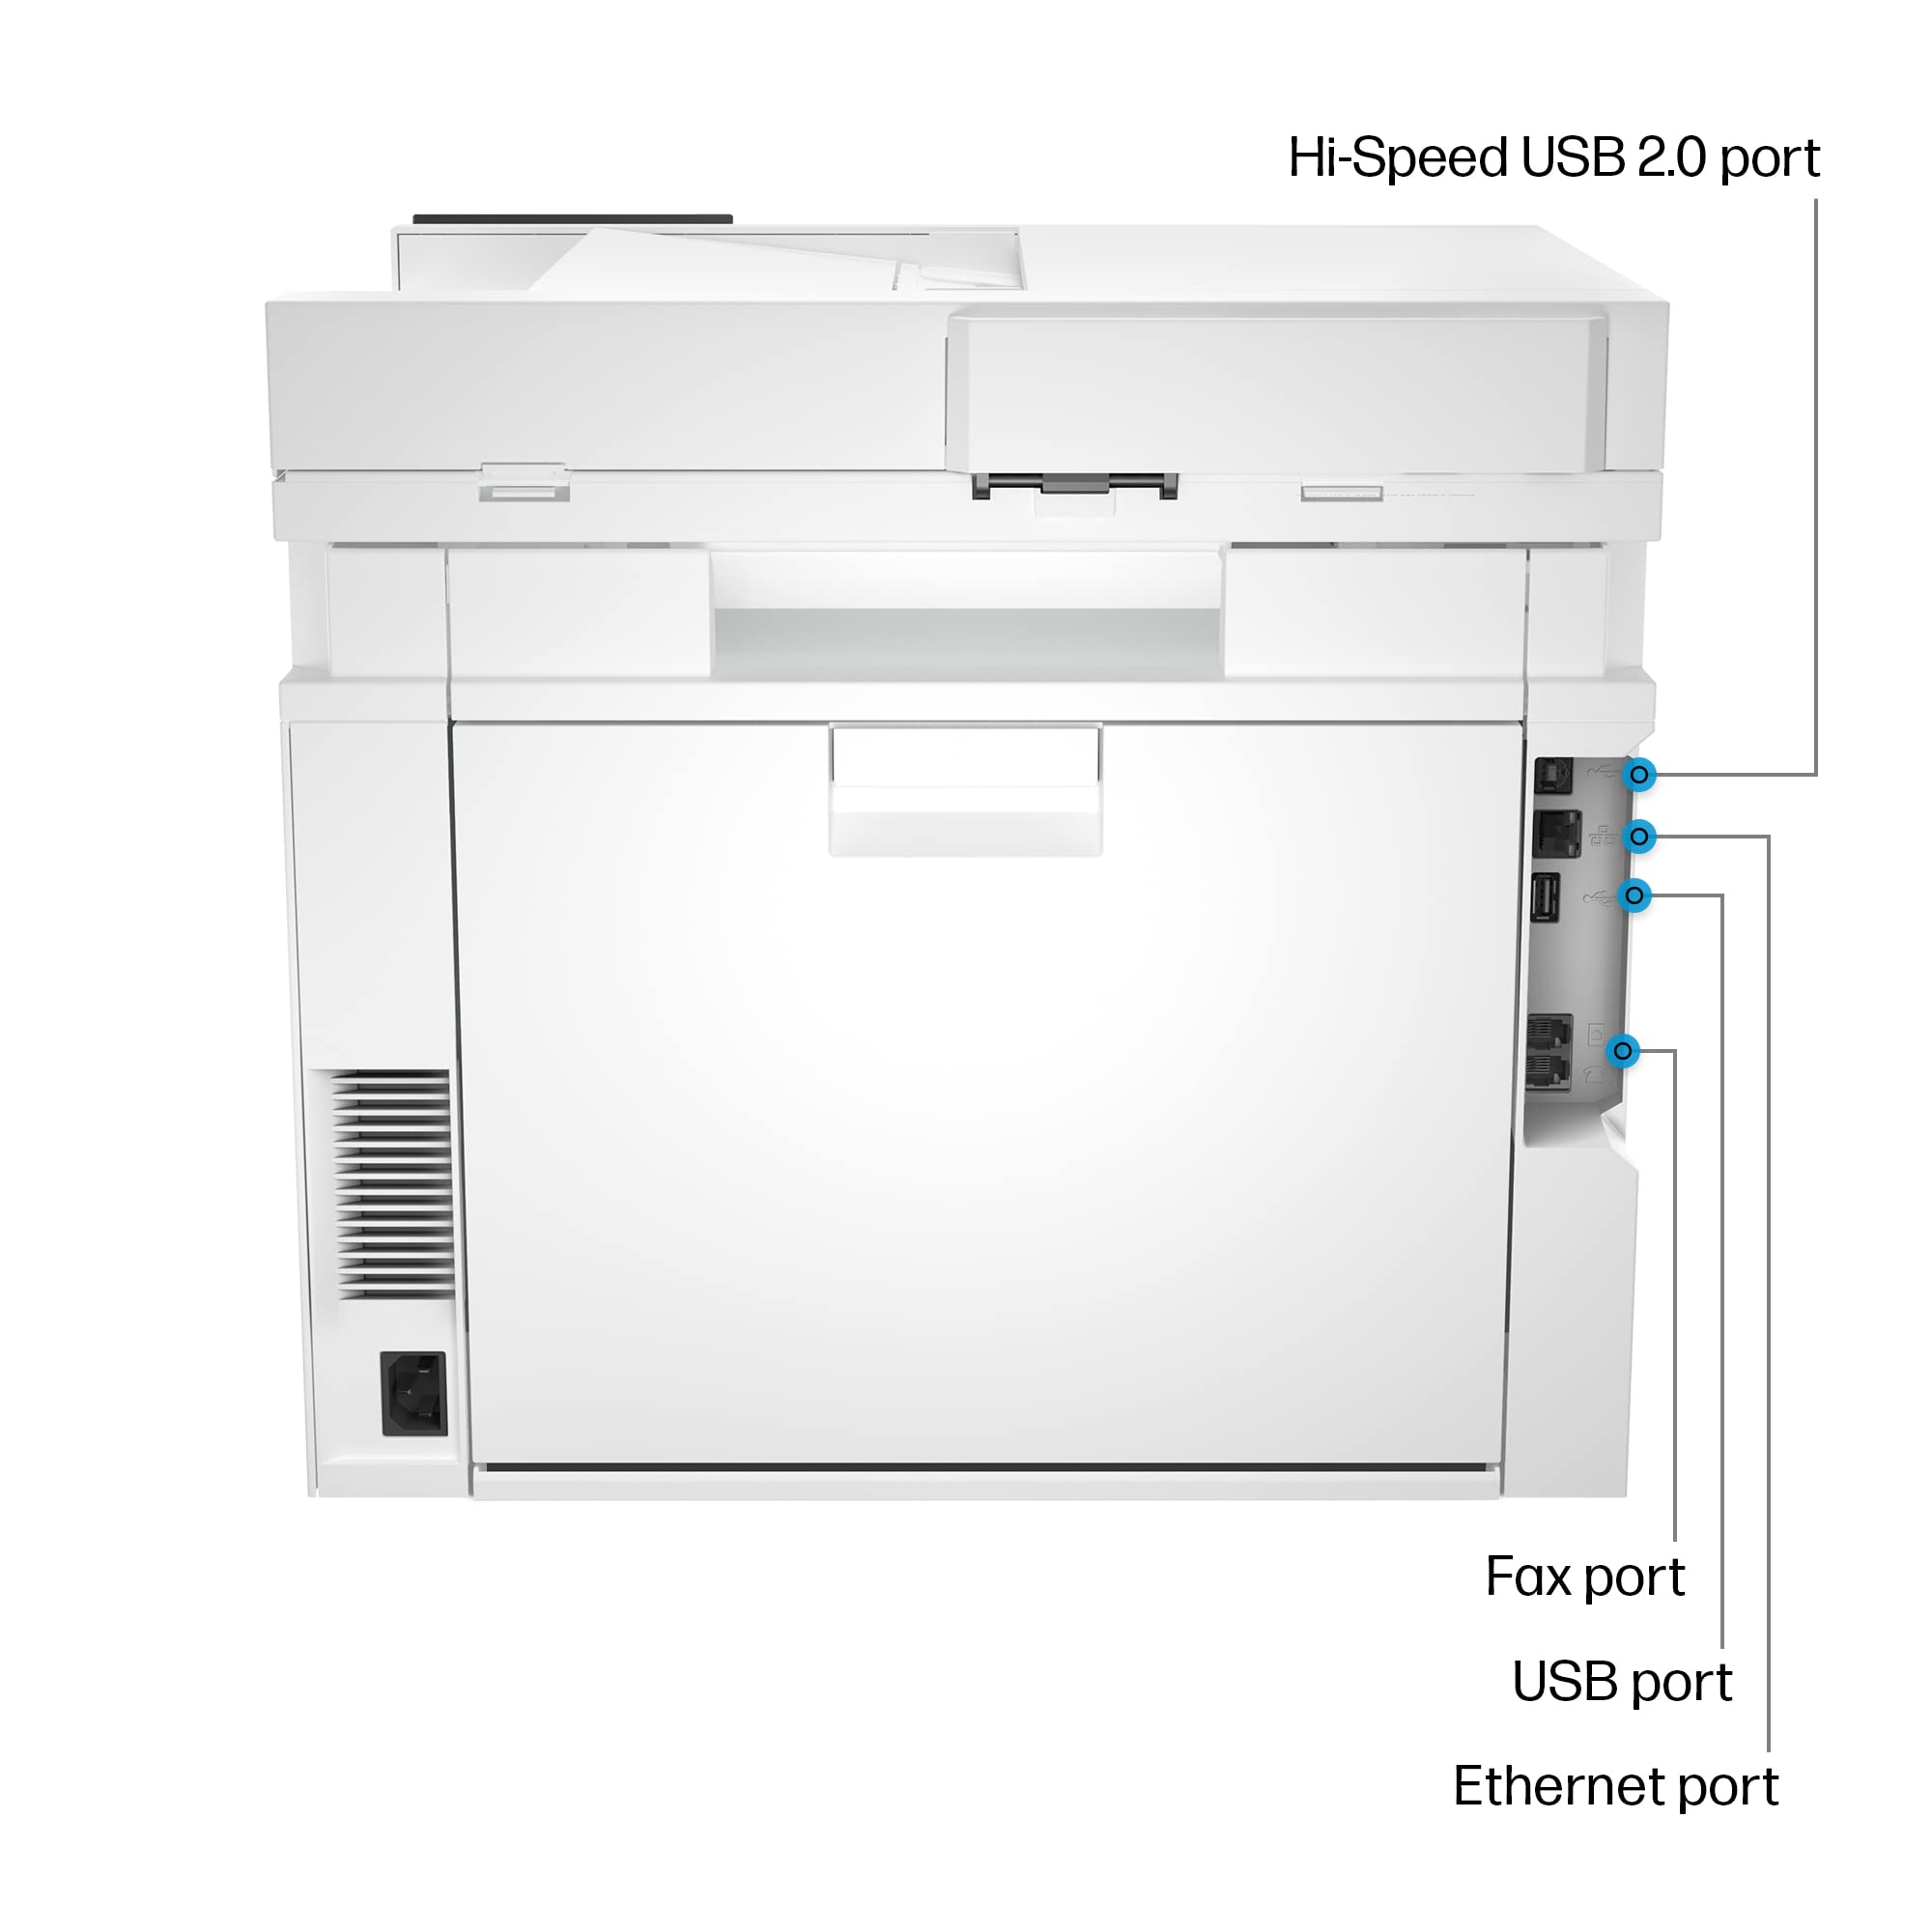 HP Color LaserJet Pro MFP 4301fdw Wireless Printer, Print, scan, copy, fax, Fast speeds, Easy setup, Mobile printing, Advanced security, Best-for-small teams, white, 16.6 x 17.1 x 15.1 in